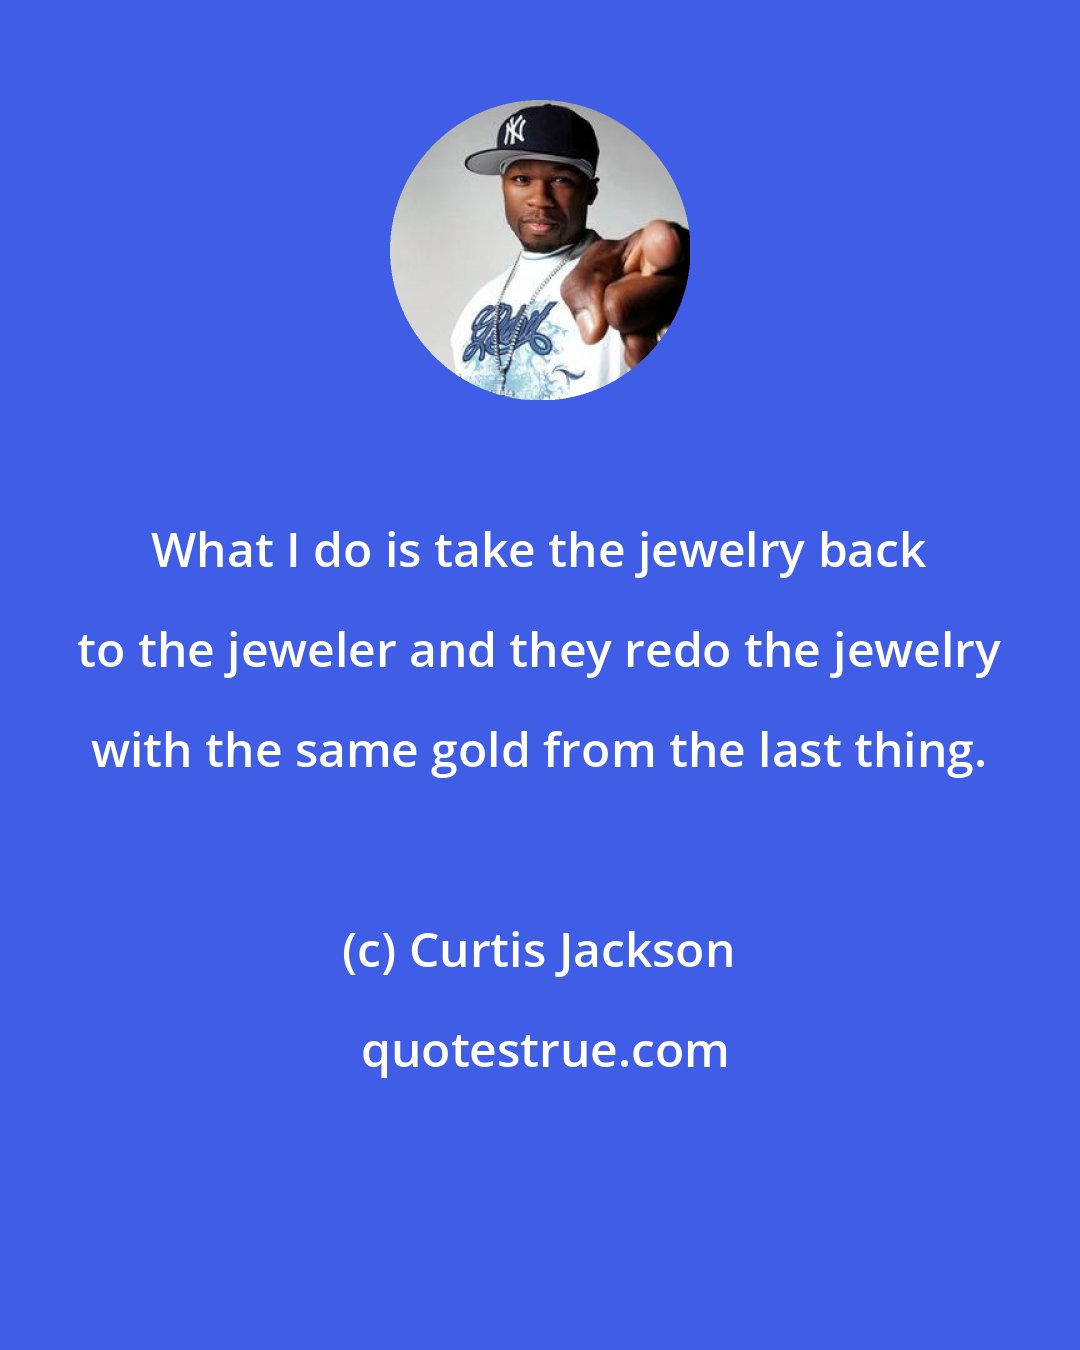 Curtis Jackson: What I do is take the jewelry back to the jeweler and they redo the jewelry with the same gold from the last thing.